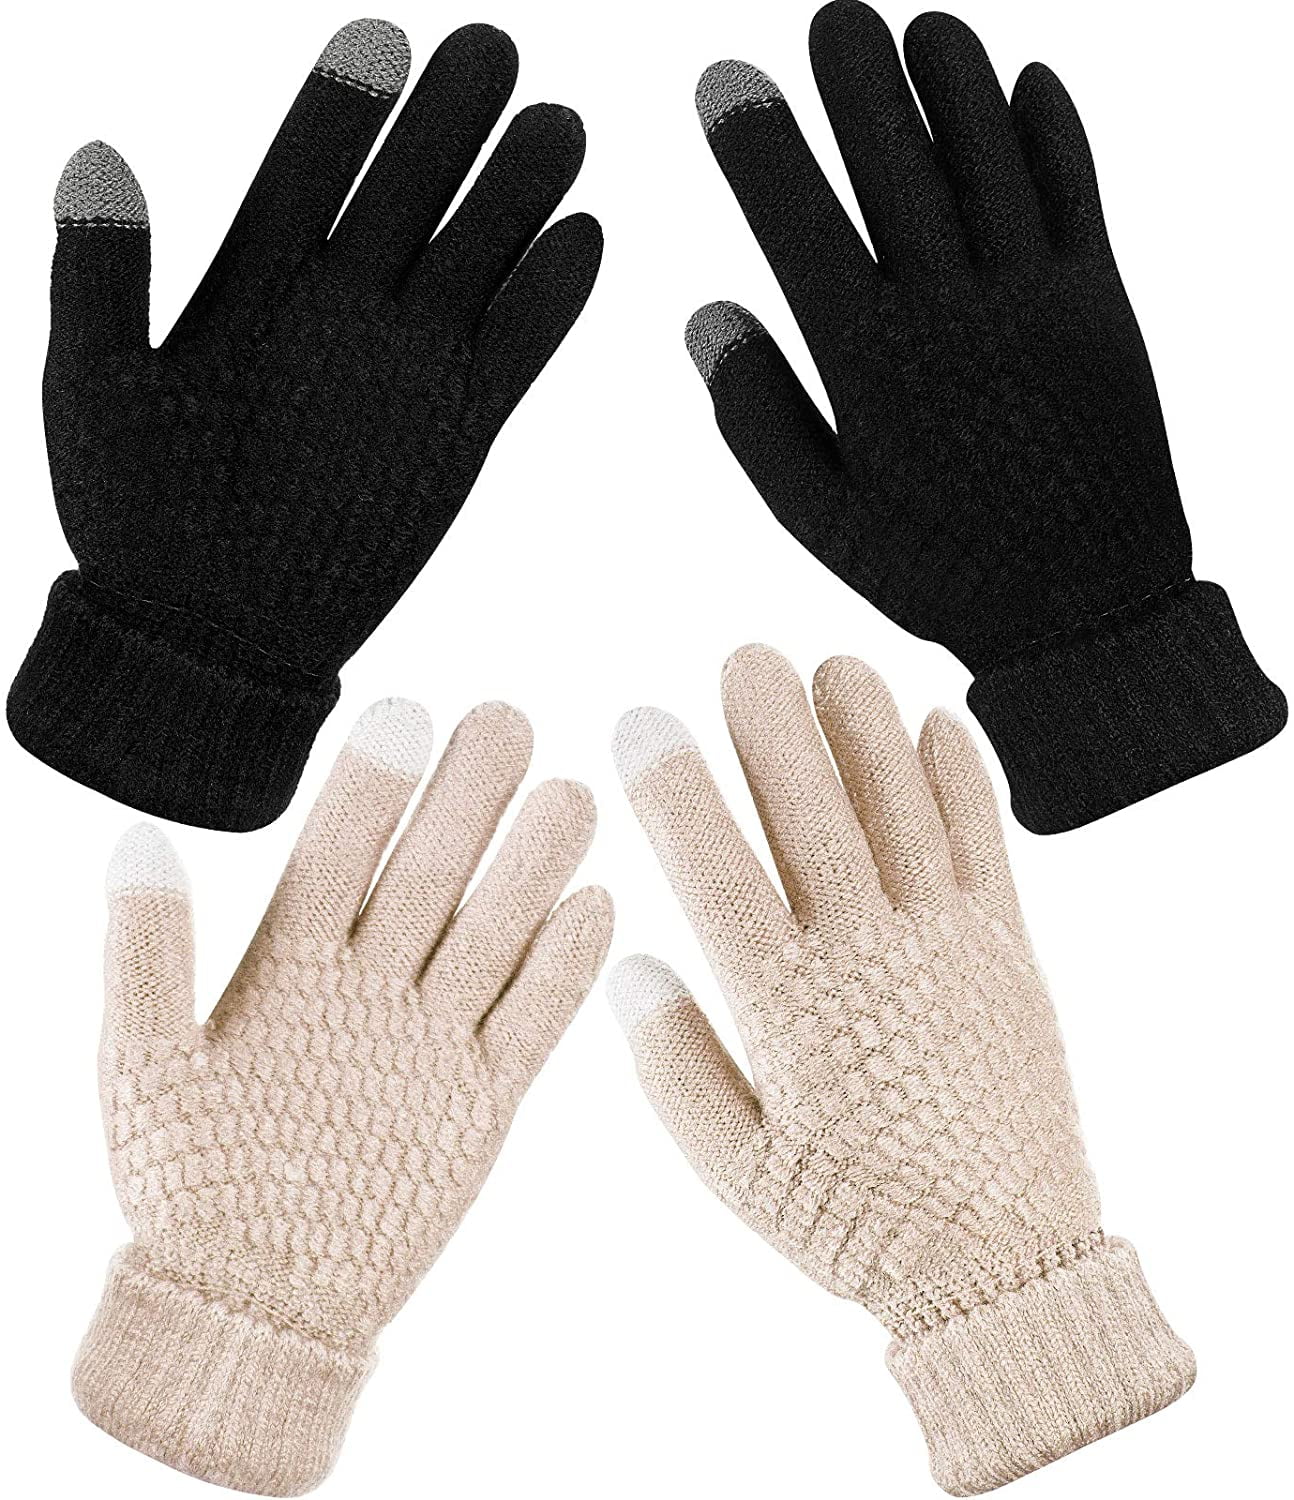 4 Pairs Winter Knit Touchscreen Gloves Warm Texting Gloves Elastic Anti-slip Gloves for Adults 